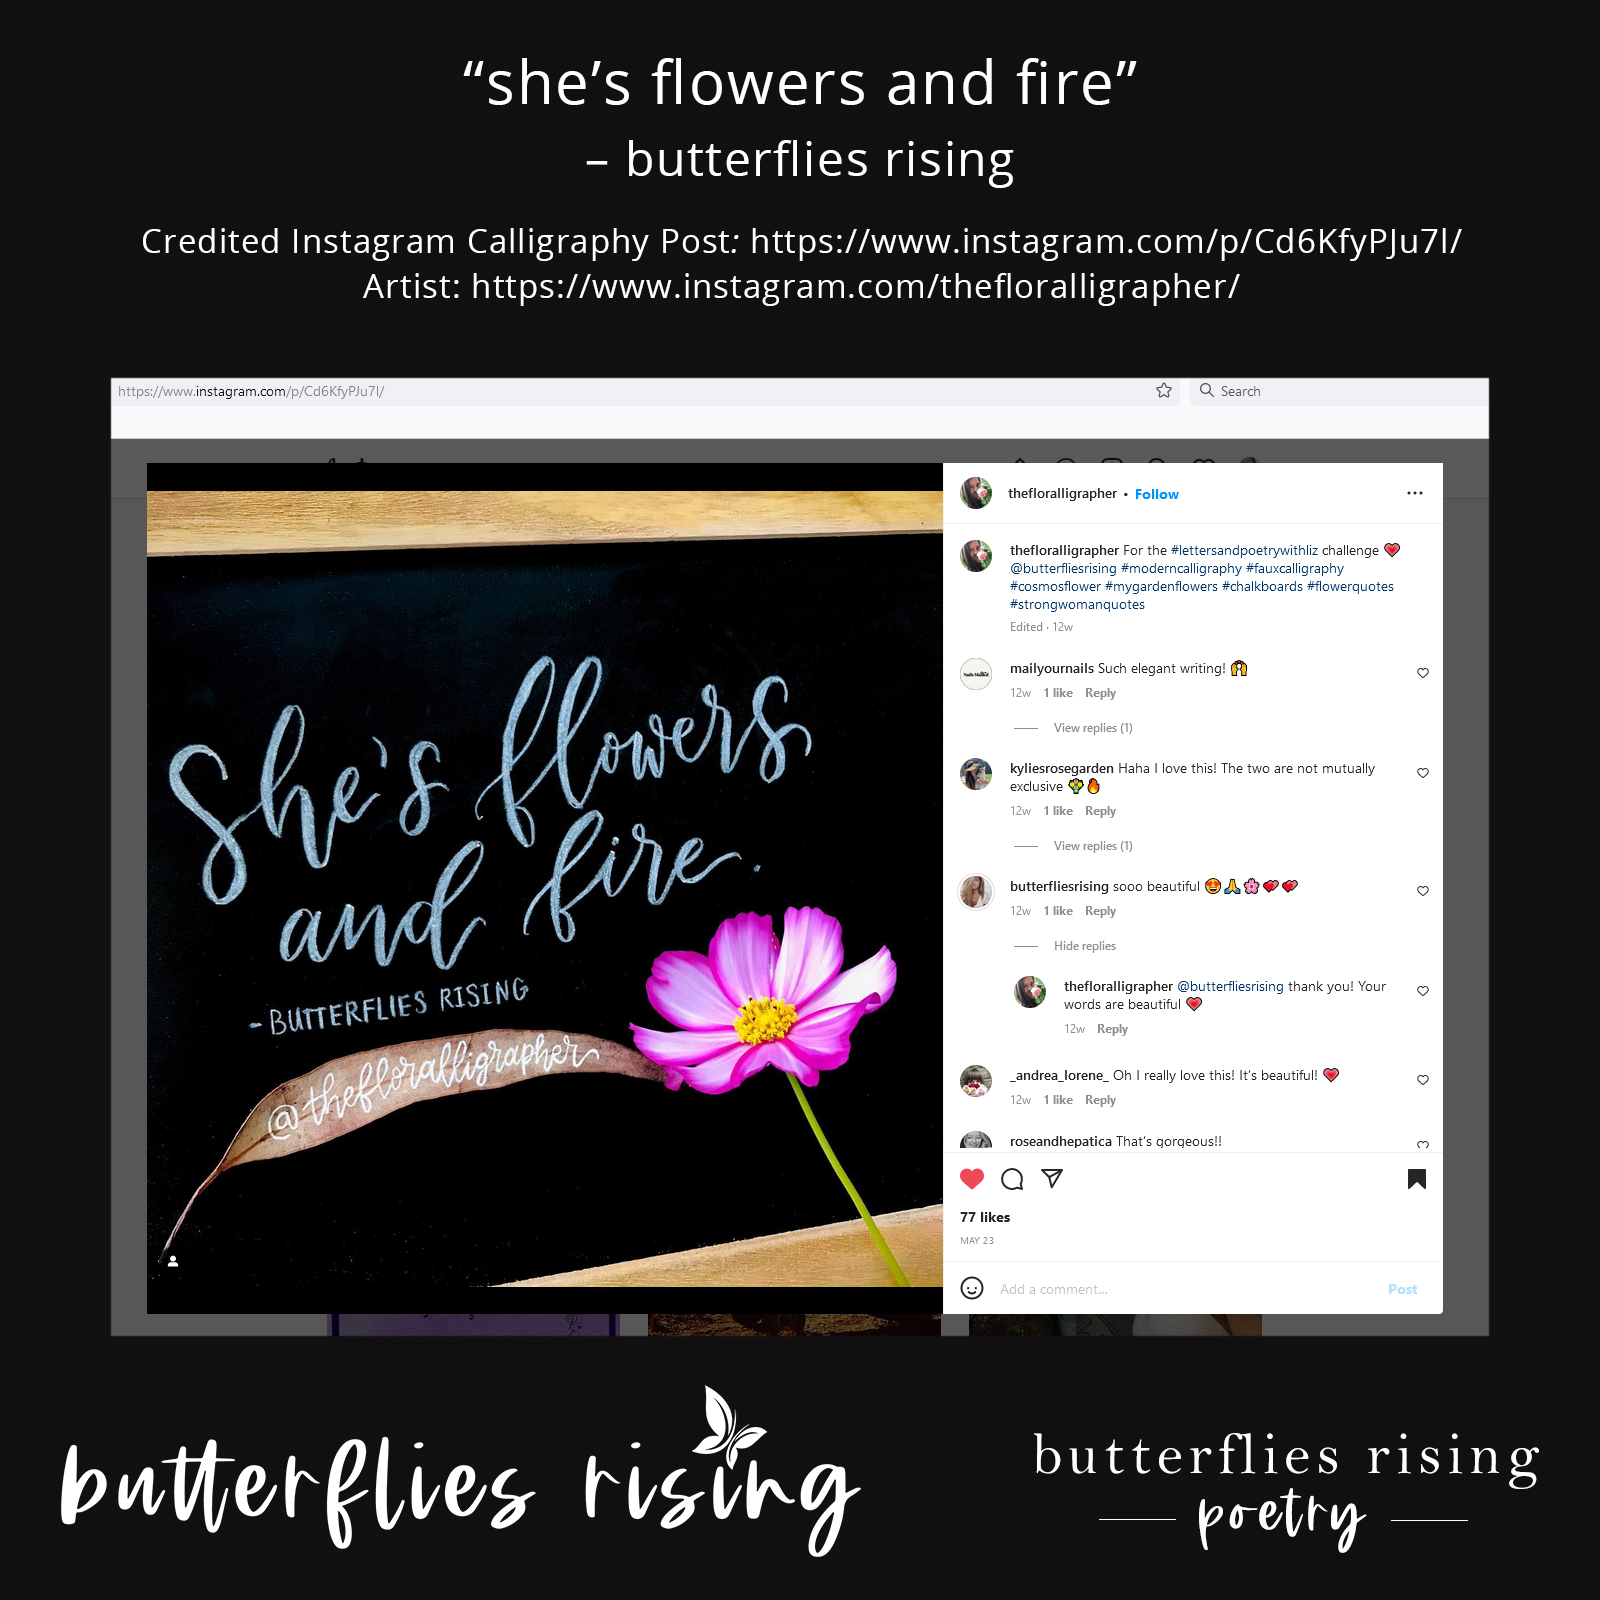 she’s flowers and fire. - butterflies rising